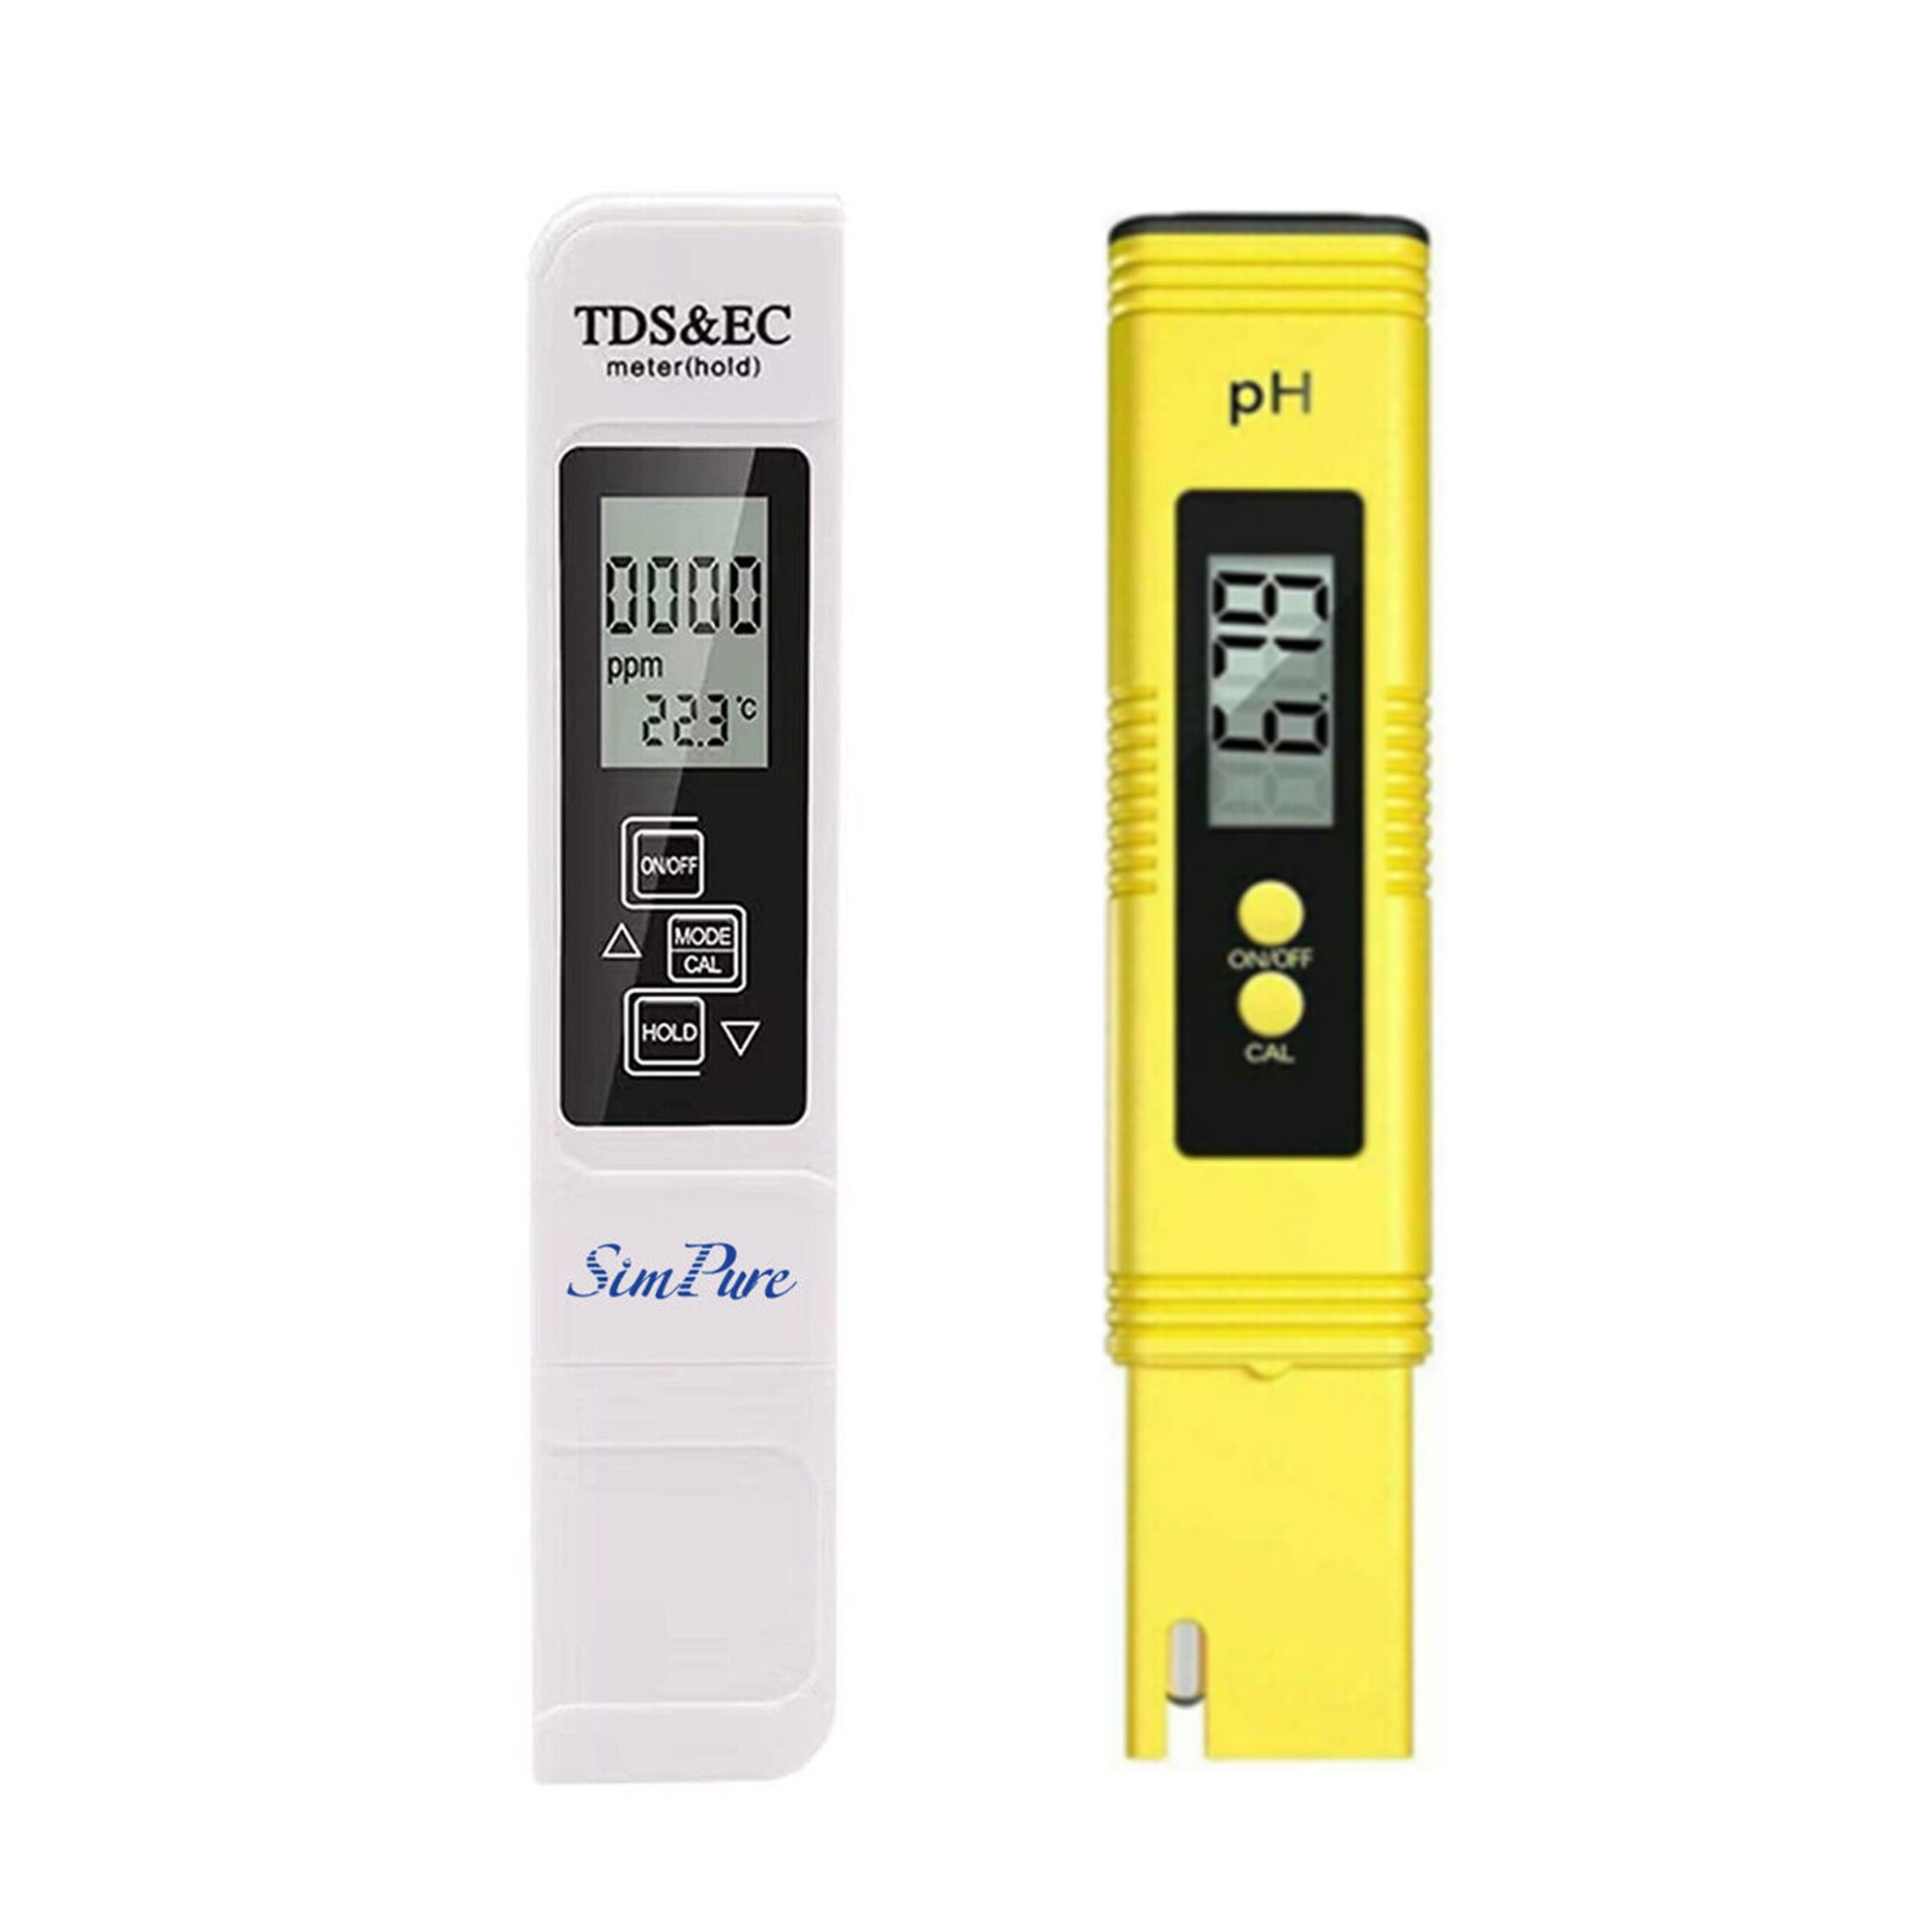 Membrane Solutions pH and TDS Meter for Water, 0.05ph High Accuracy ±2% Readout for Hydroponics, Household Drinking, and Aquarium, UL Certified - Walmart.com